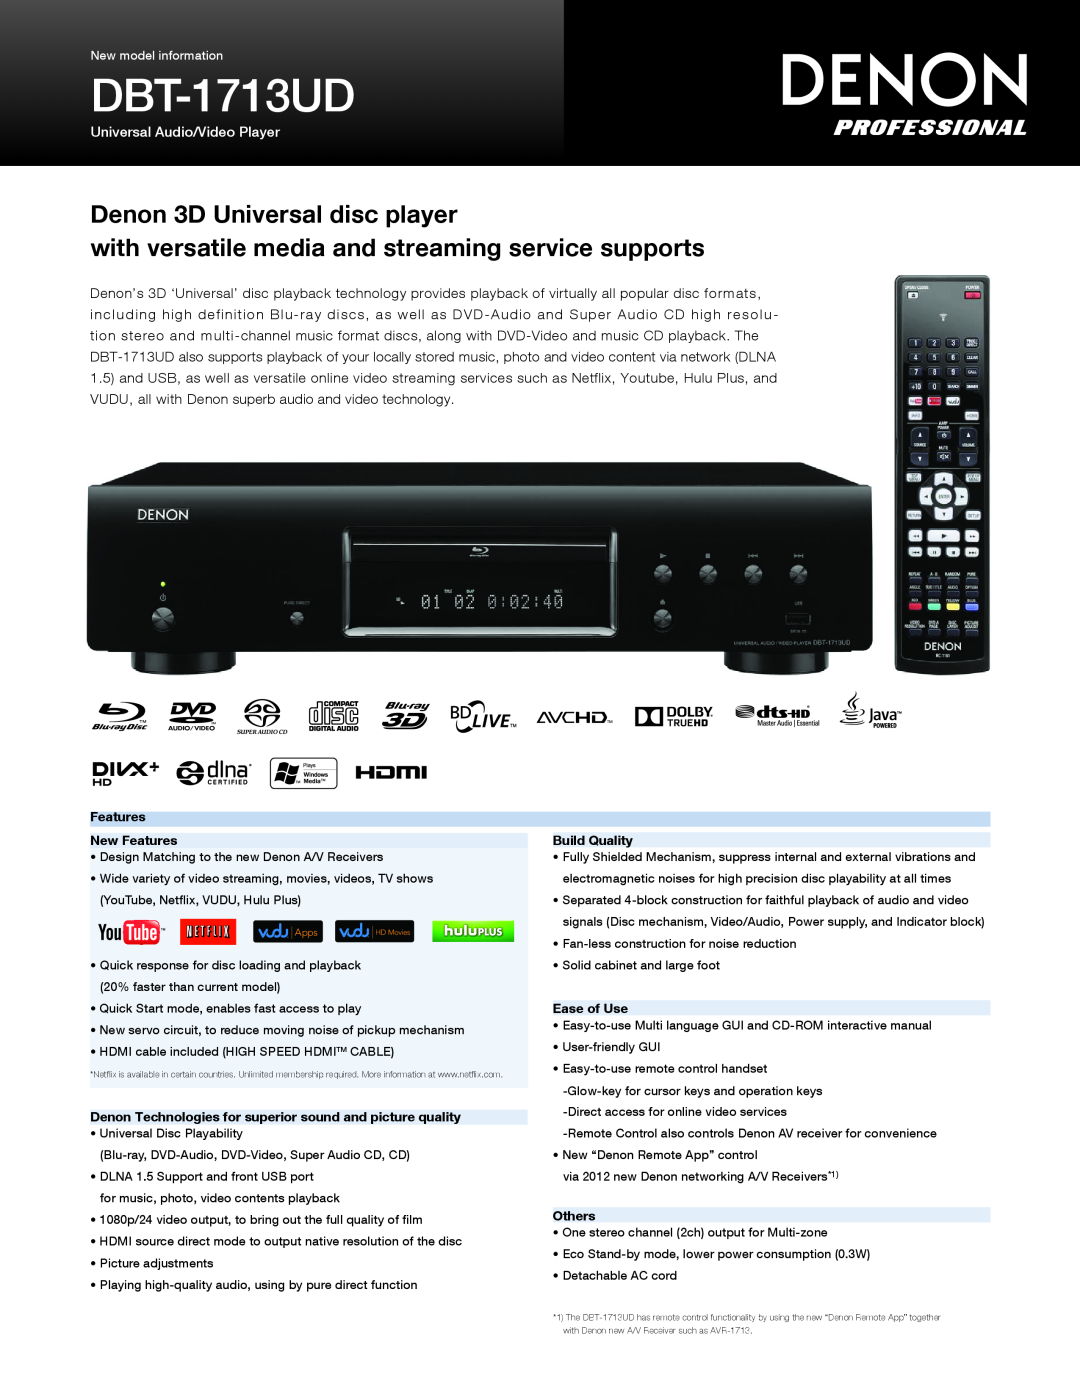 Denon DBT-1713UD manual Denon 3D Universal disc player, with versatile media and streaming service supports, Build Quality 